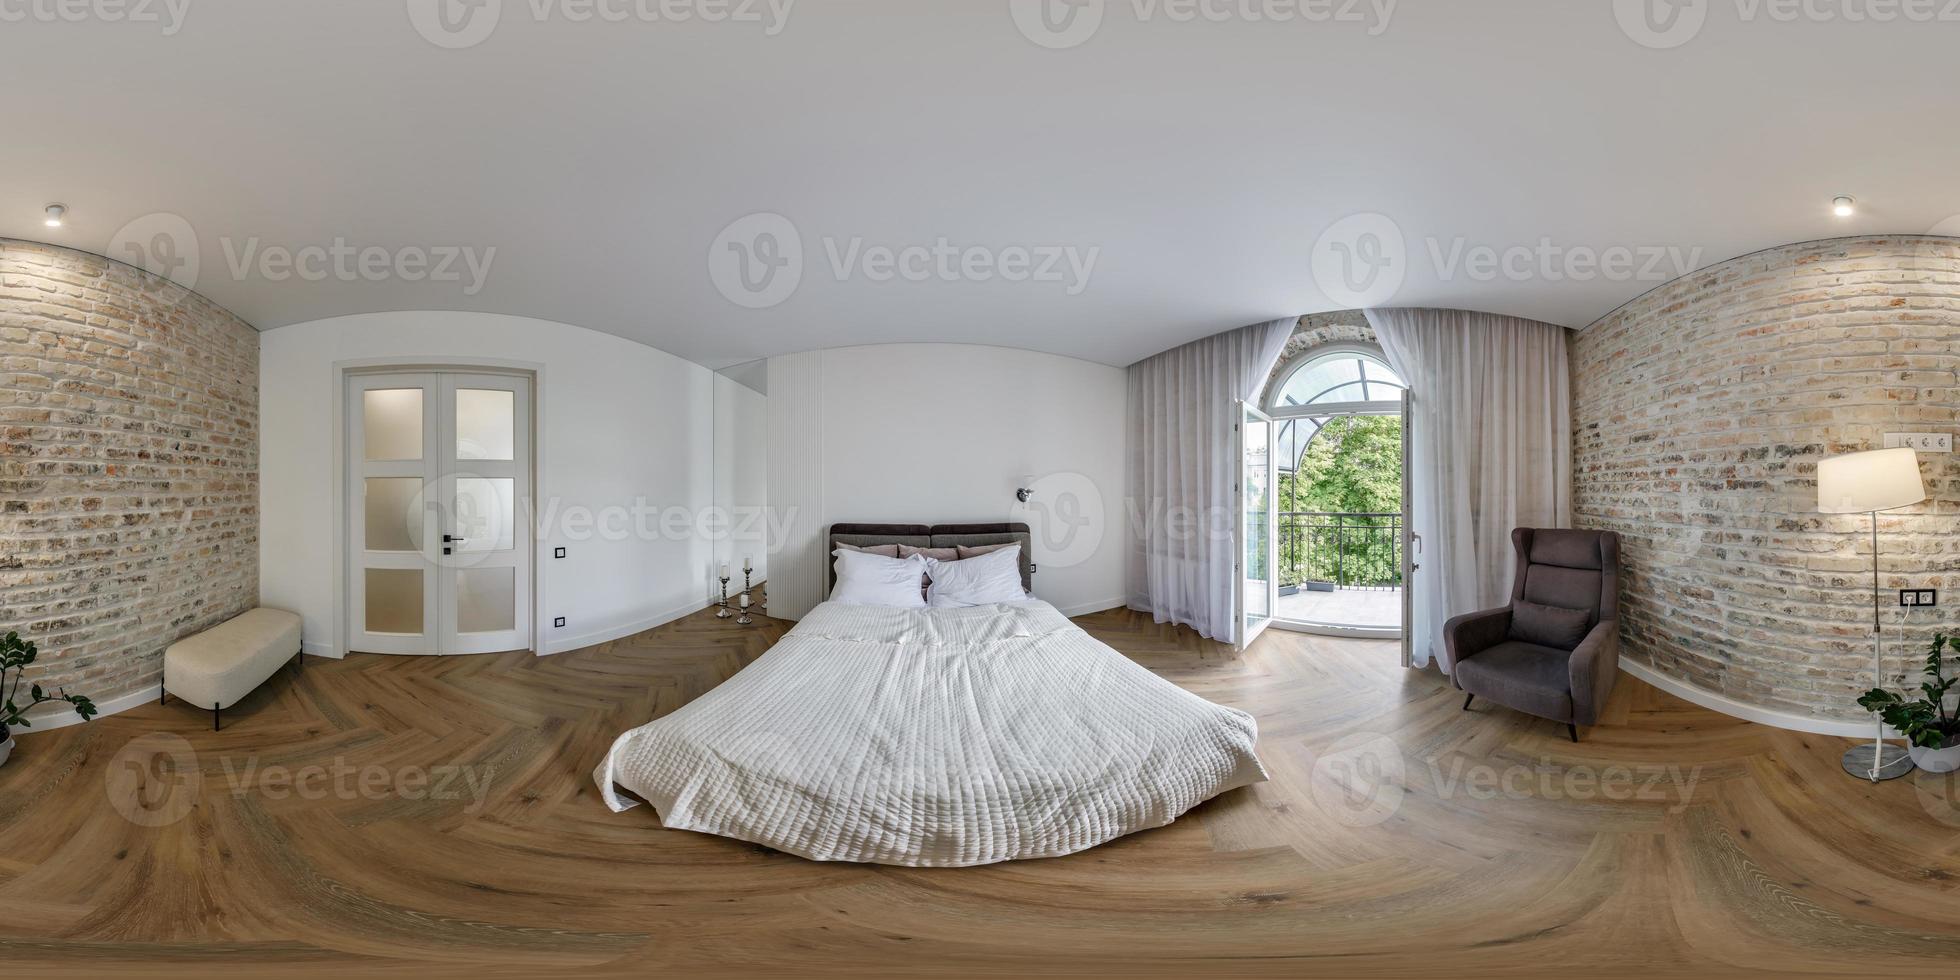 full seamless spherical hdri 360 panorama in interior of bedroom in studio apartments with arched access to the balcony in equirectangular projection,  VR content photo